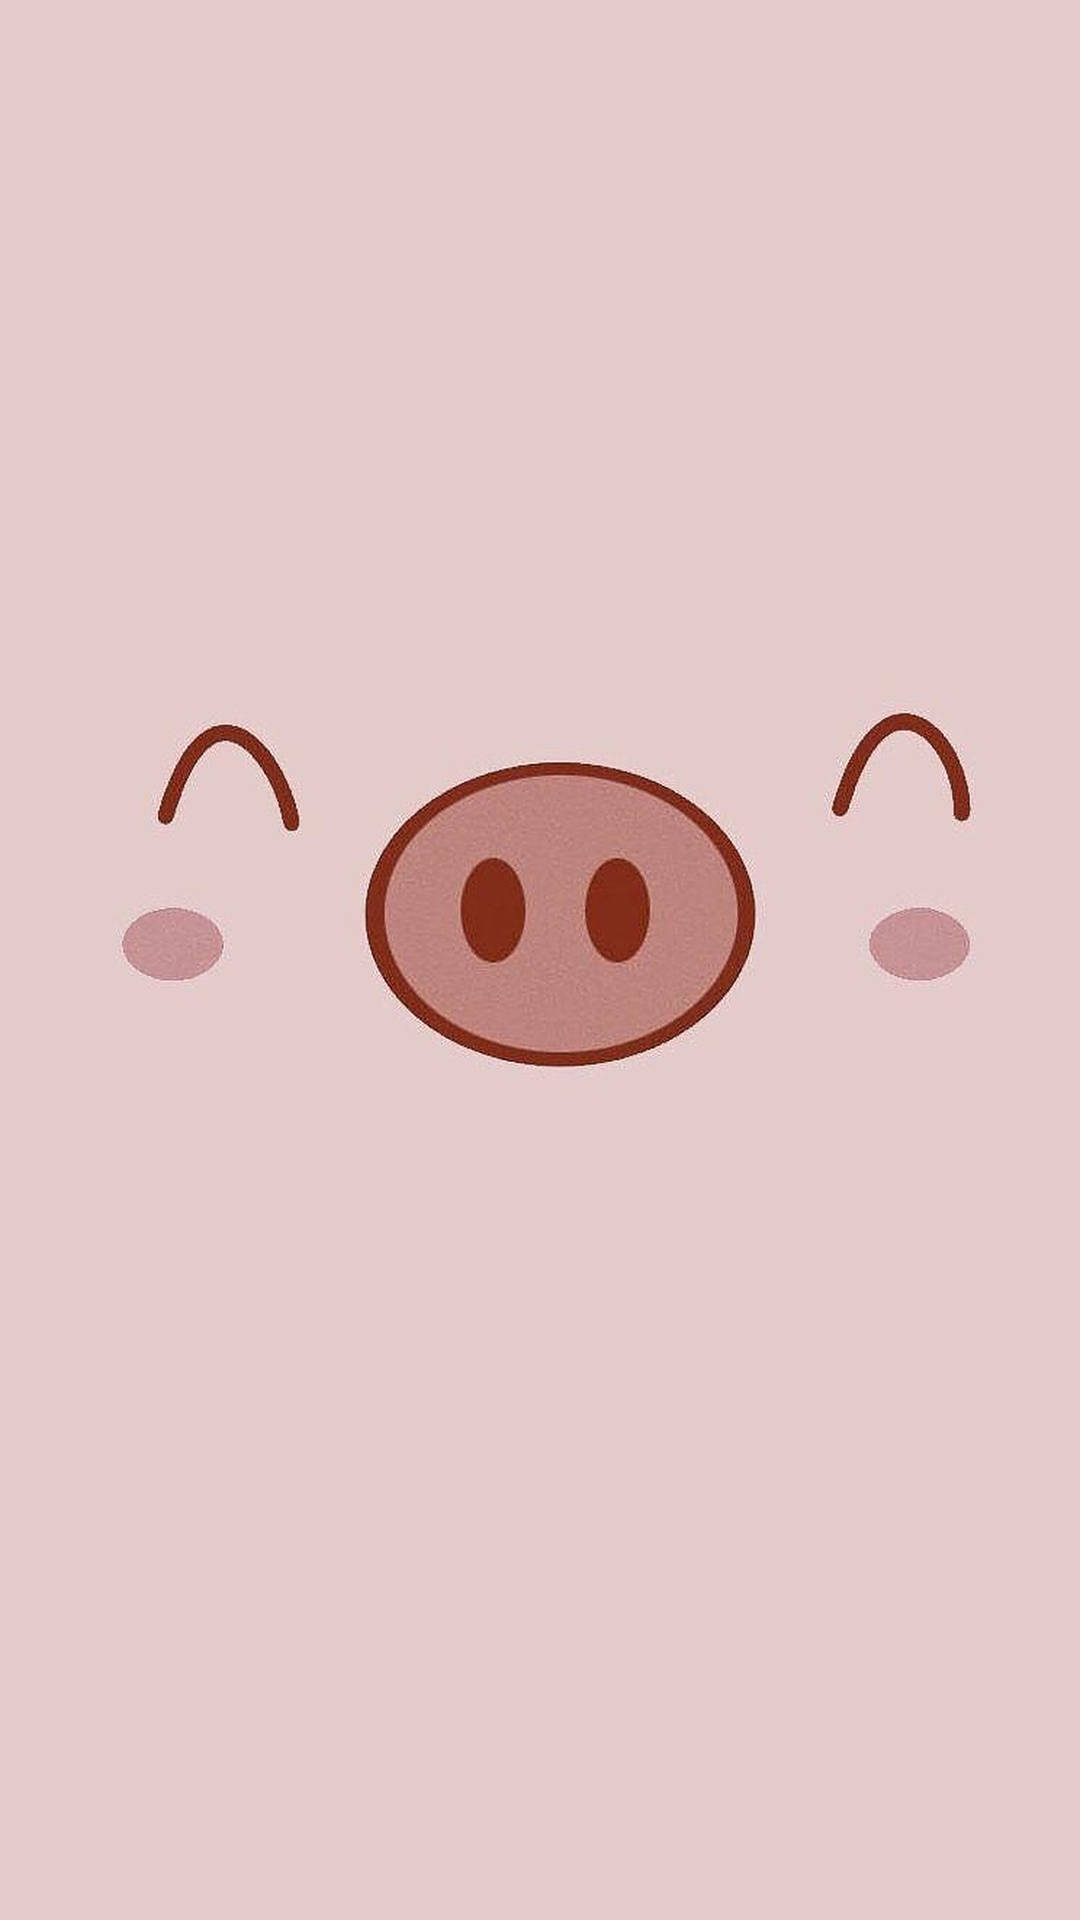 Cute Pig Smiling Background